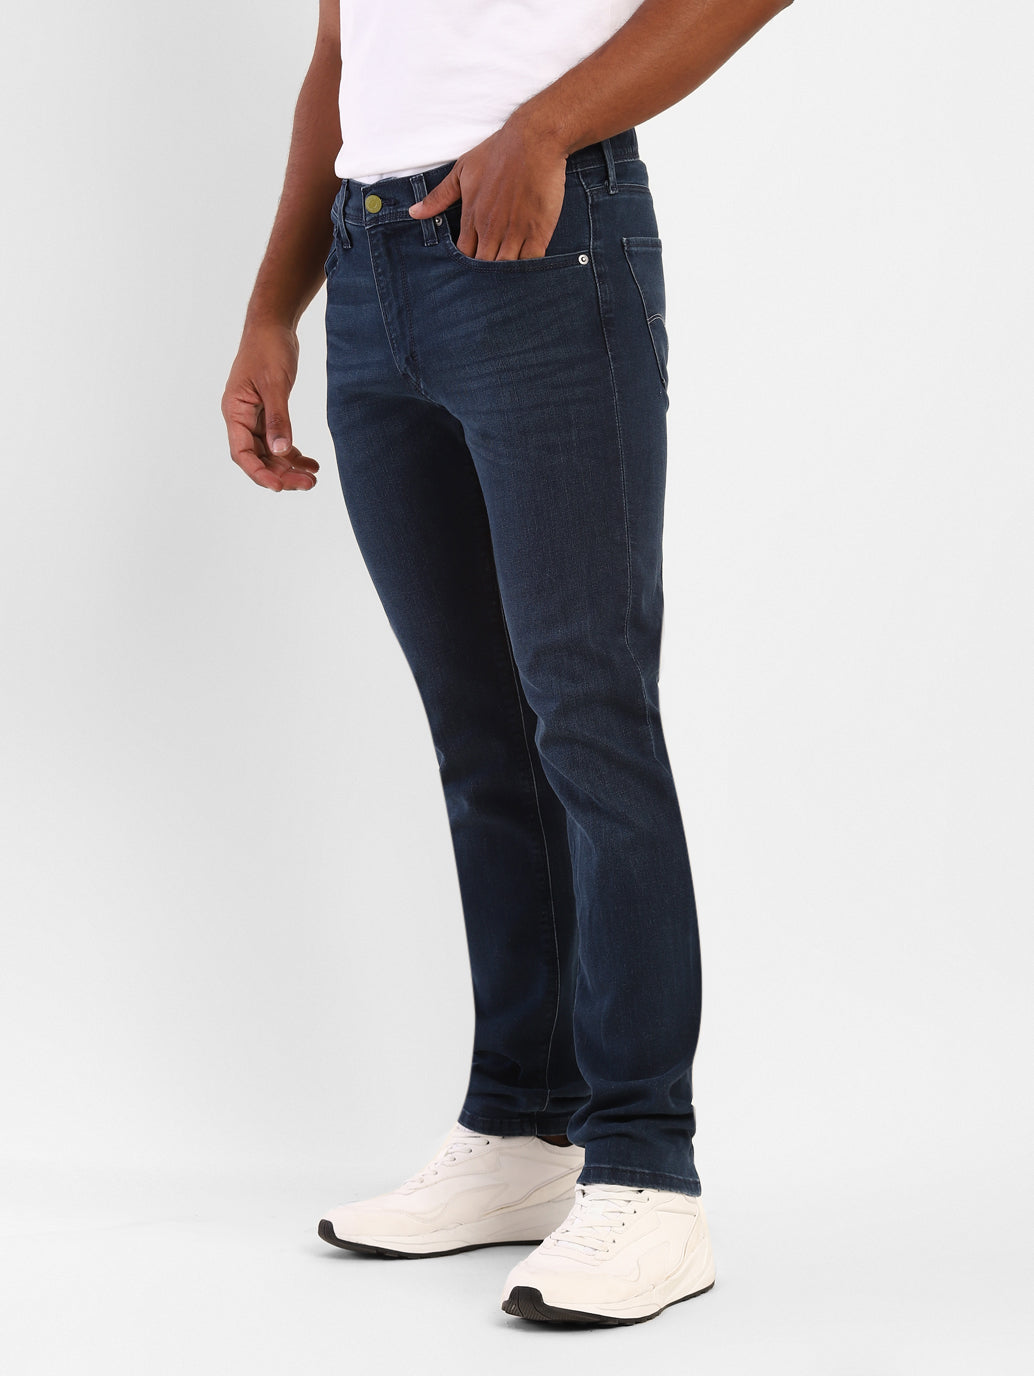 Crafted Jeans from the Levi's Motorcycle Collection